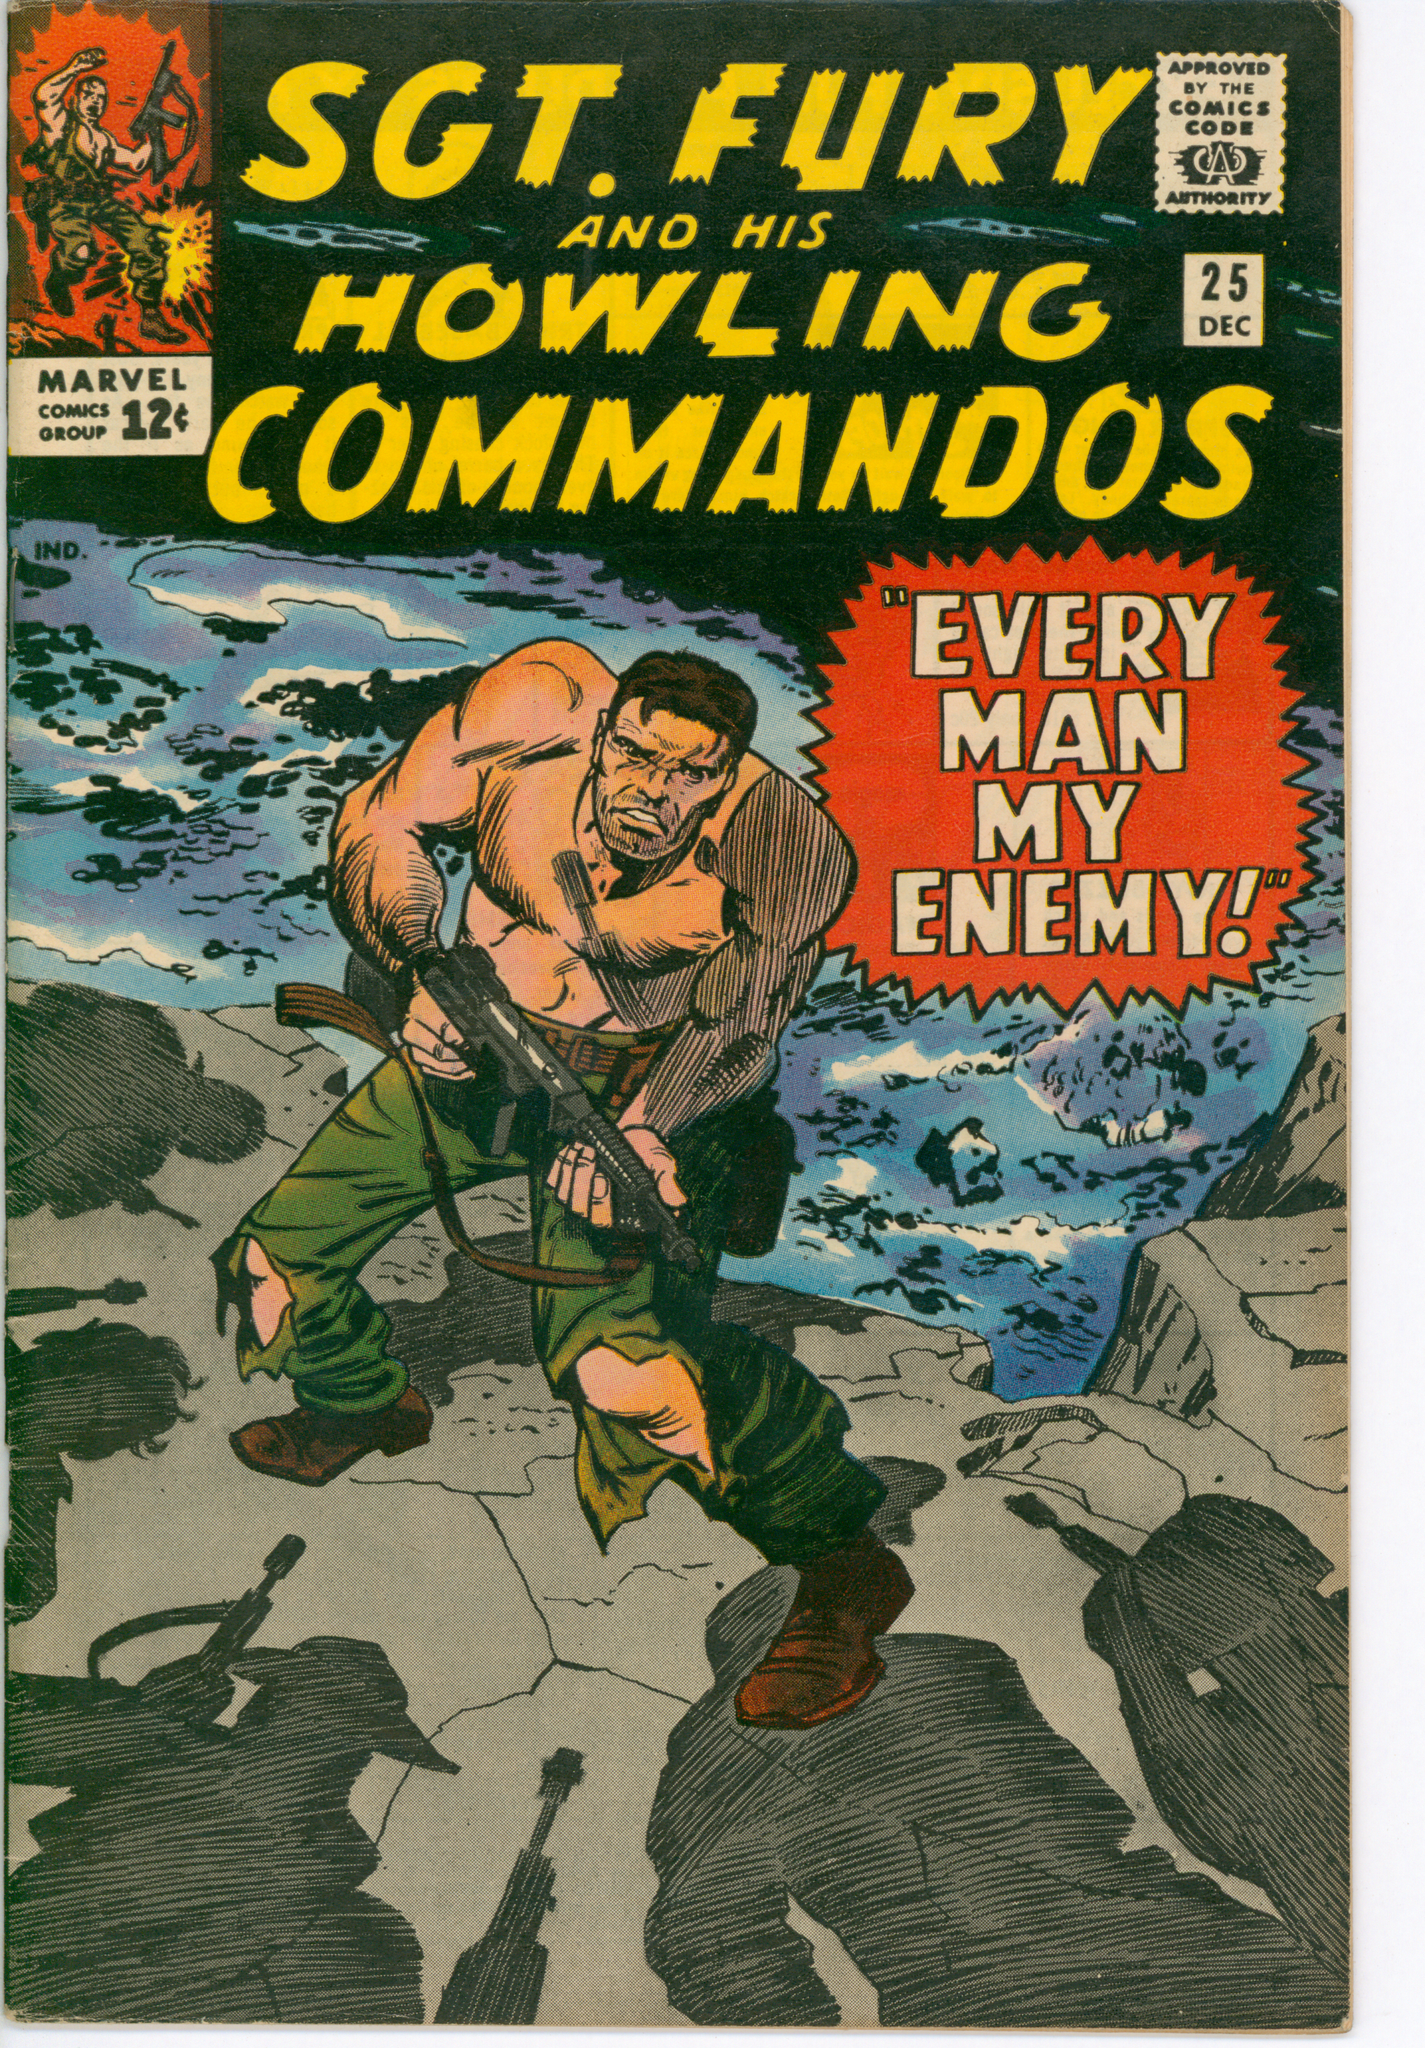 Sgt. Fury and his Howling Commandos #25